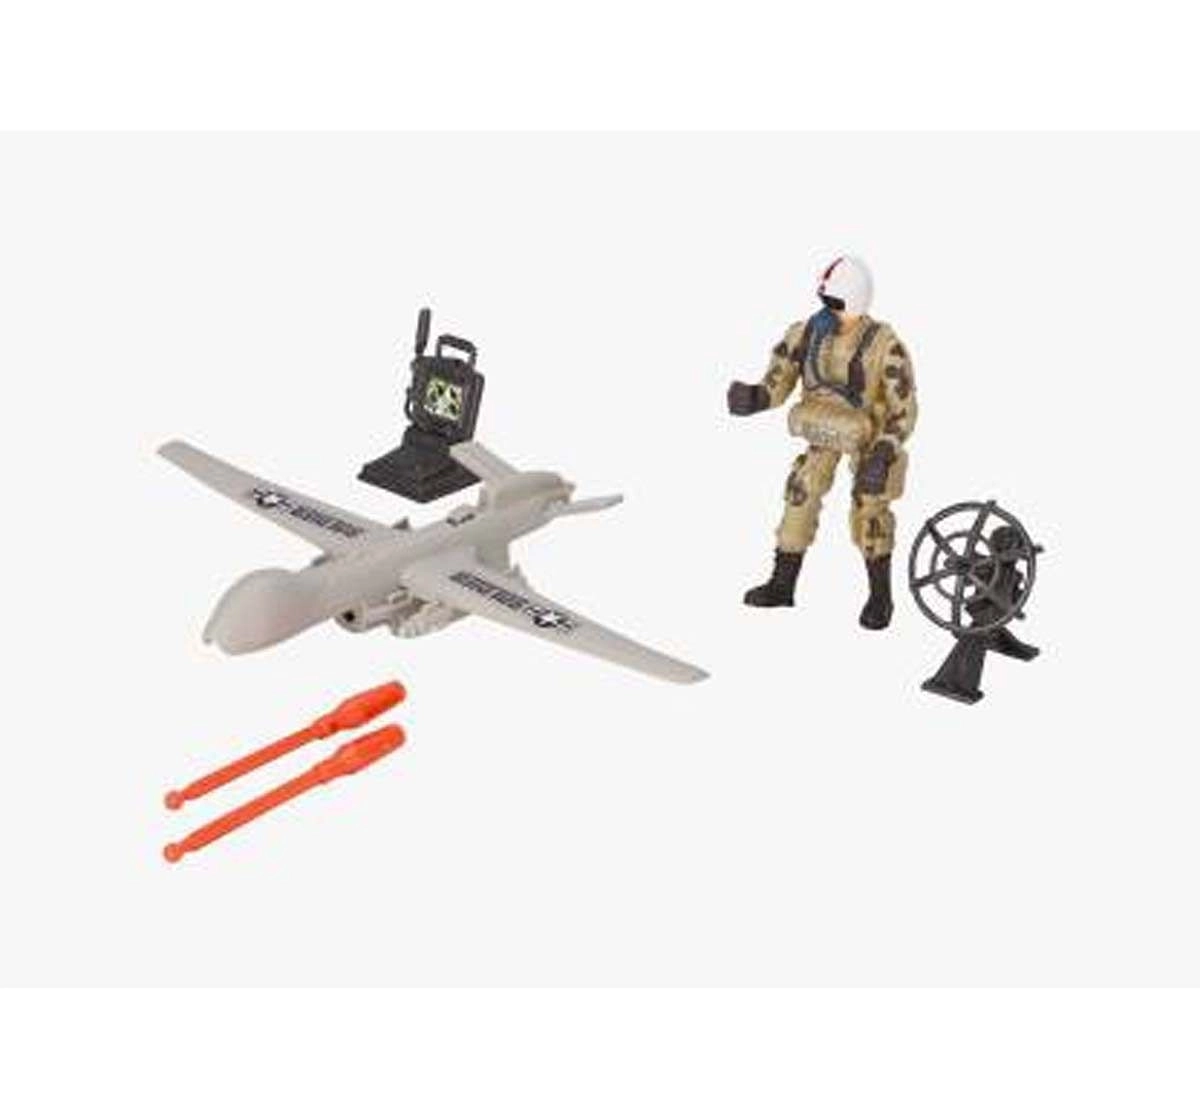 Hamleys Soldier force 9 Rapid Action Playset Action Figure Play Sets for Kids Age 3Y+